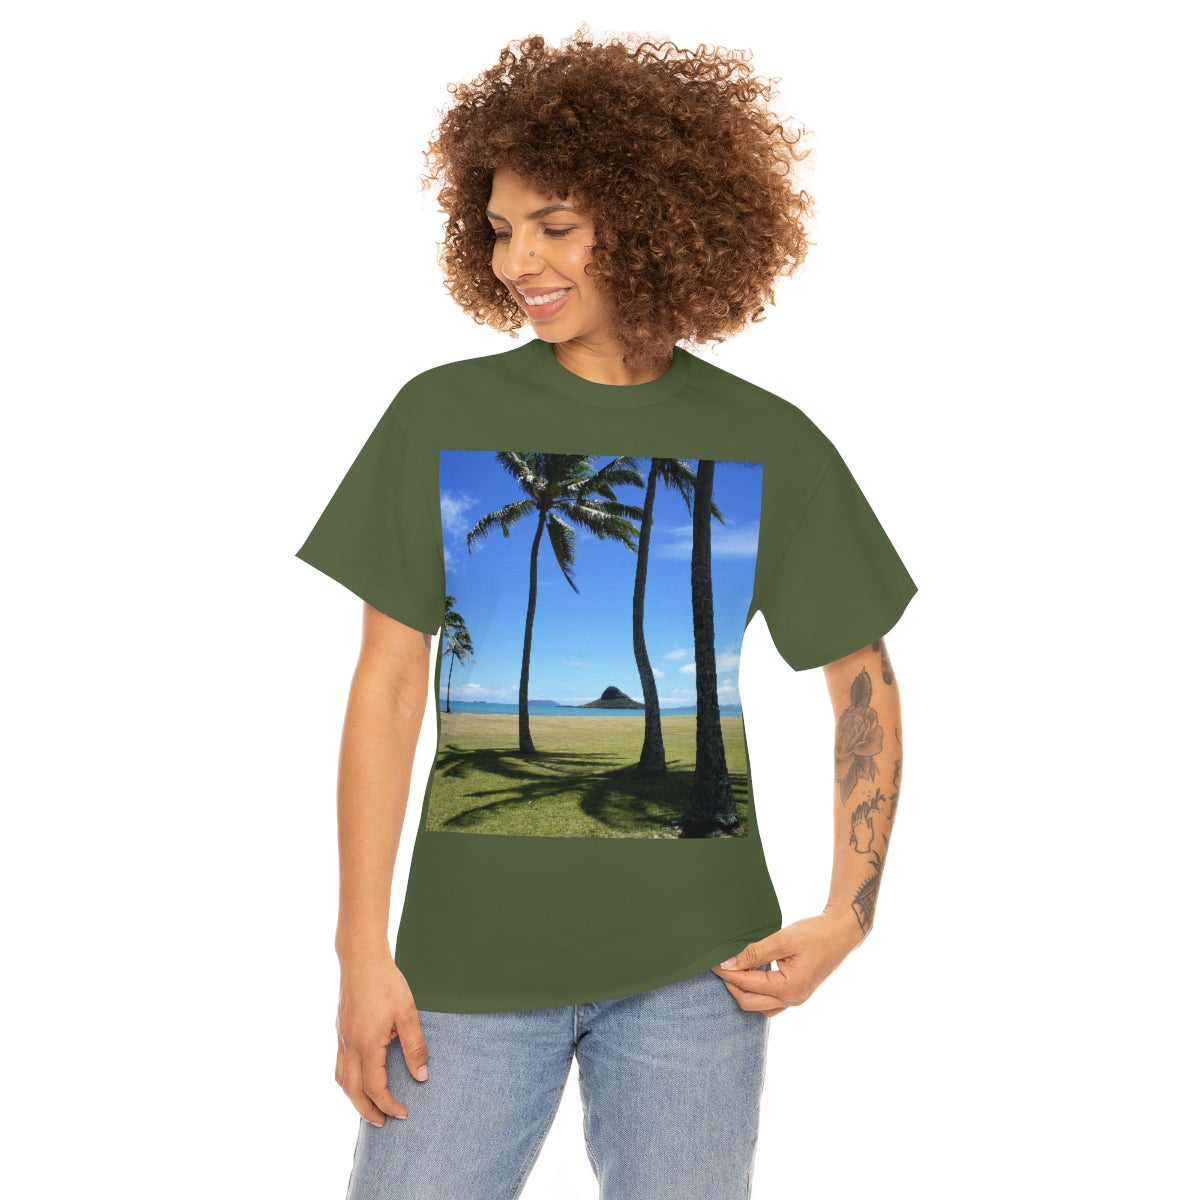 Visionary Dreams - Unisex Heavy Cotton Tee - Fry1Productions